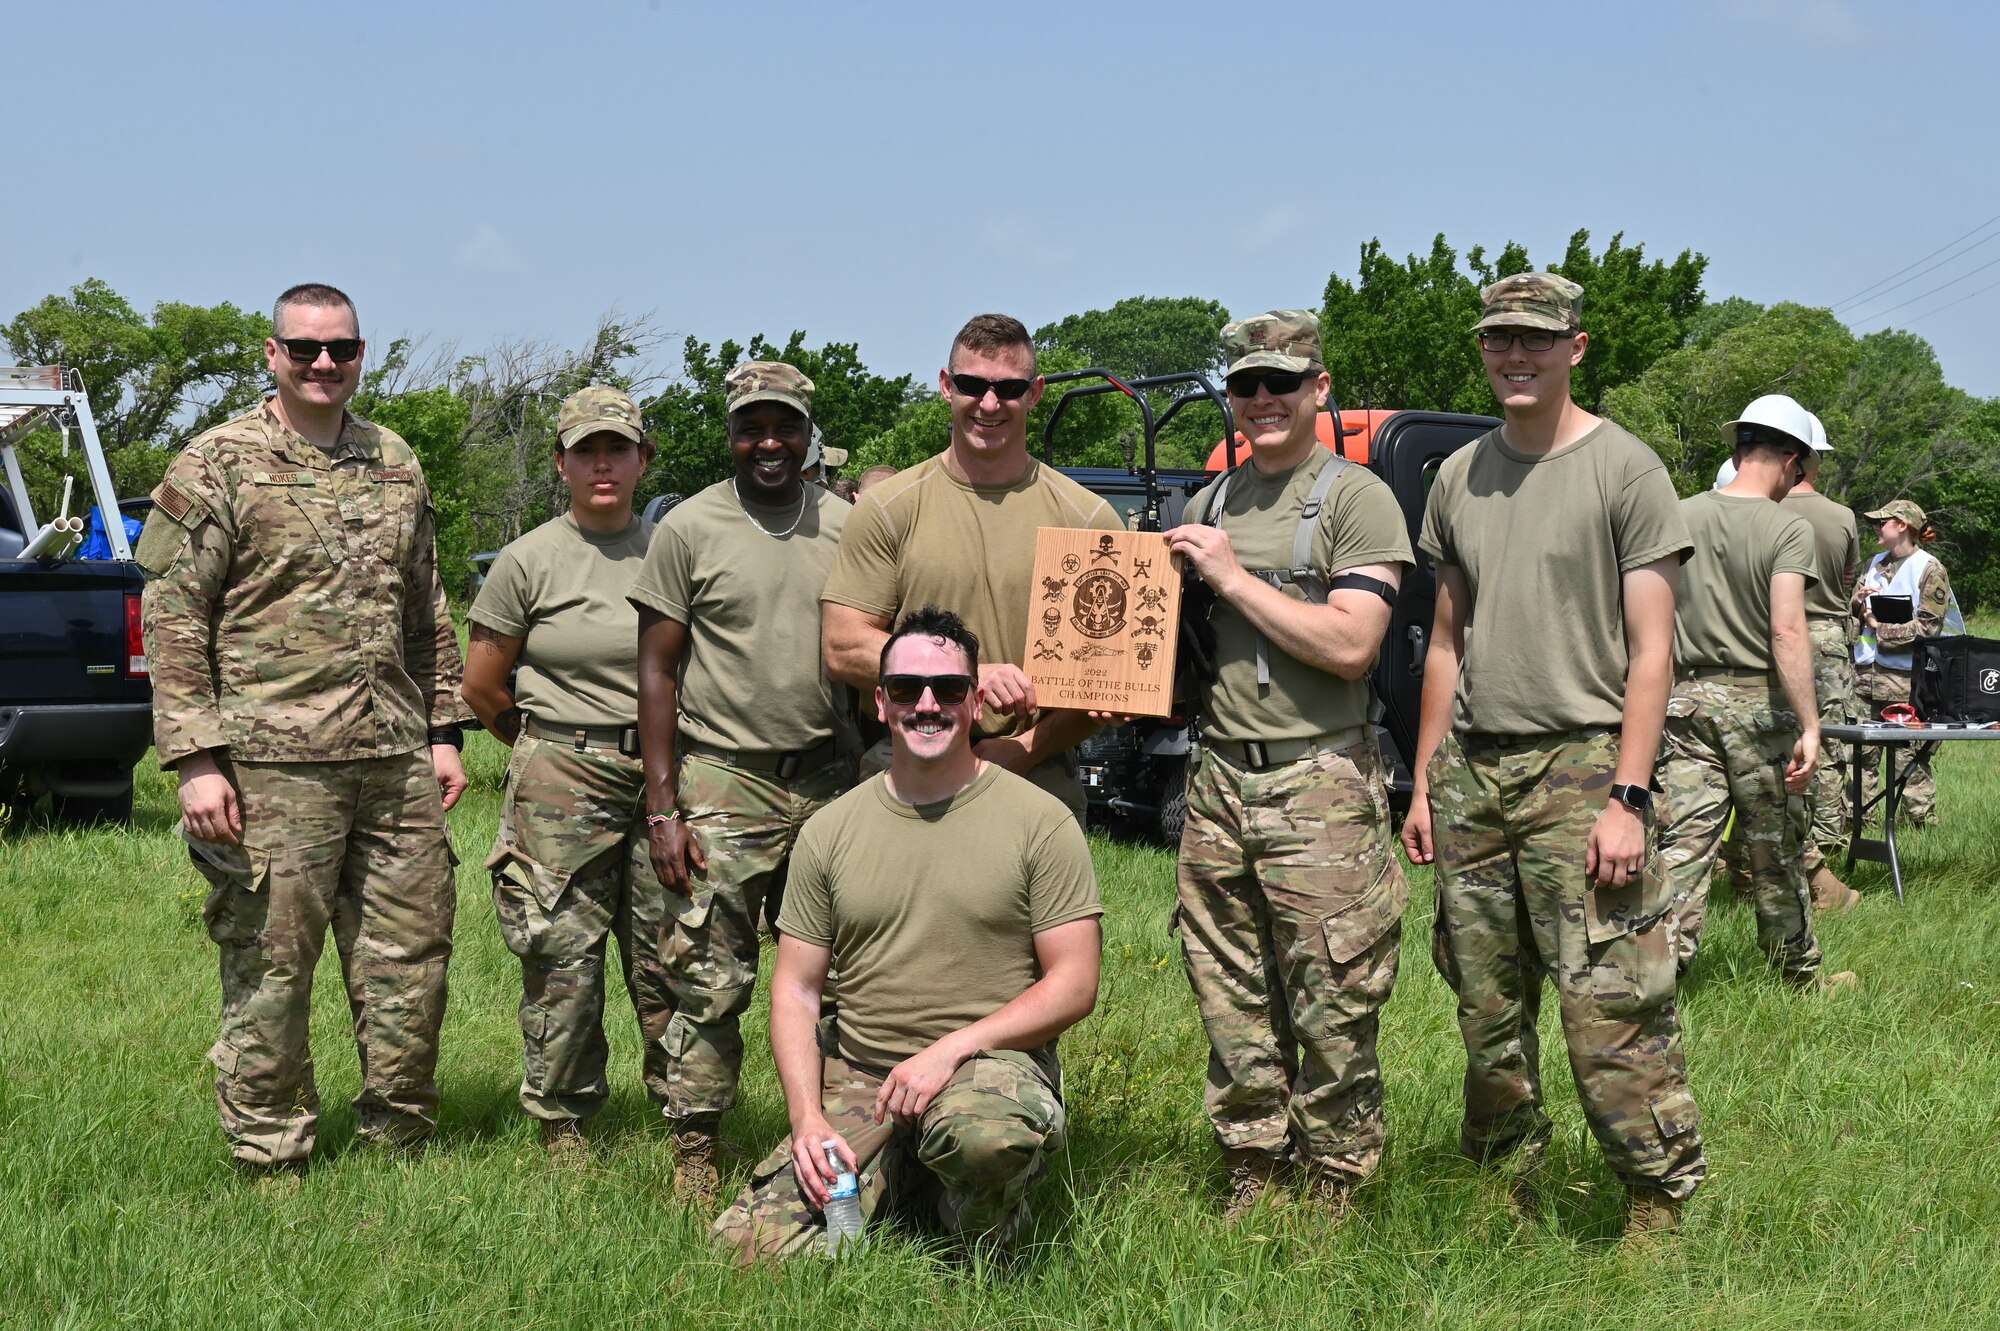 Airmen from the 22nd Civil Engineer Squadron pose with their trophy after winning the “Battle of the Bulls” training exercise June 15, 2022, at McConnell Air Force Base, Kansas.